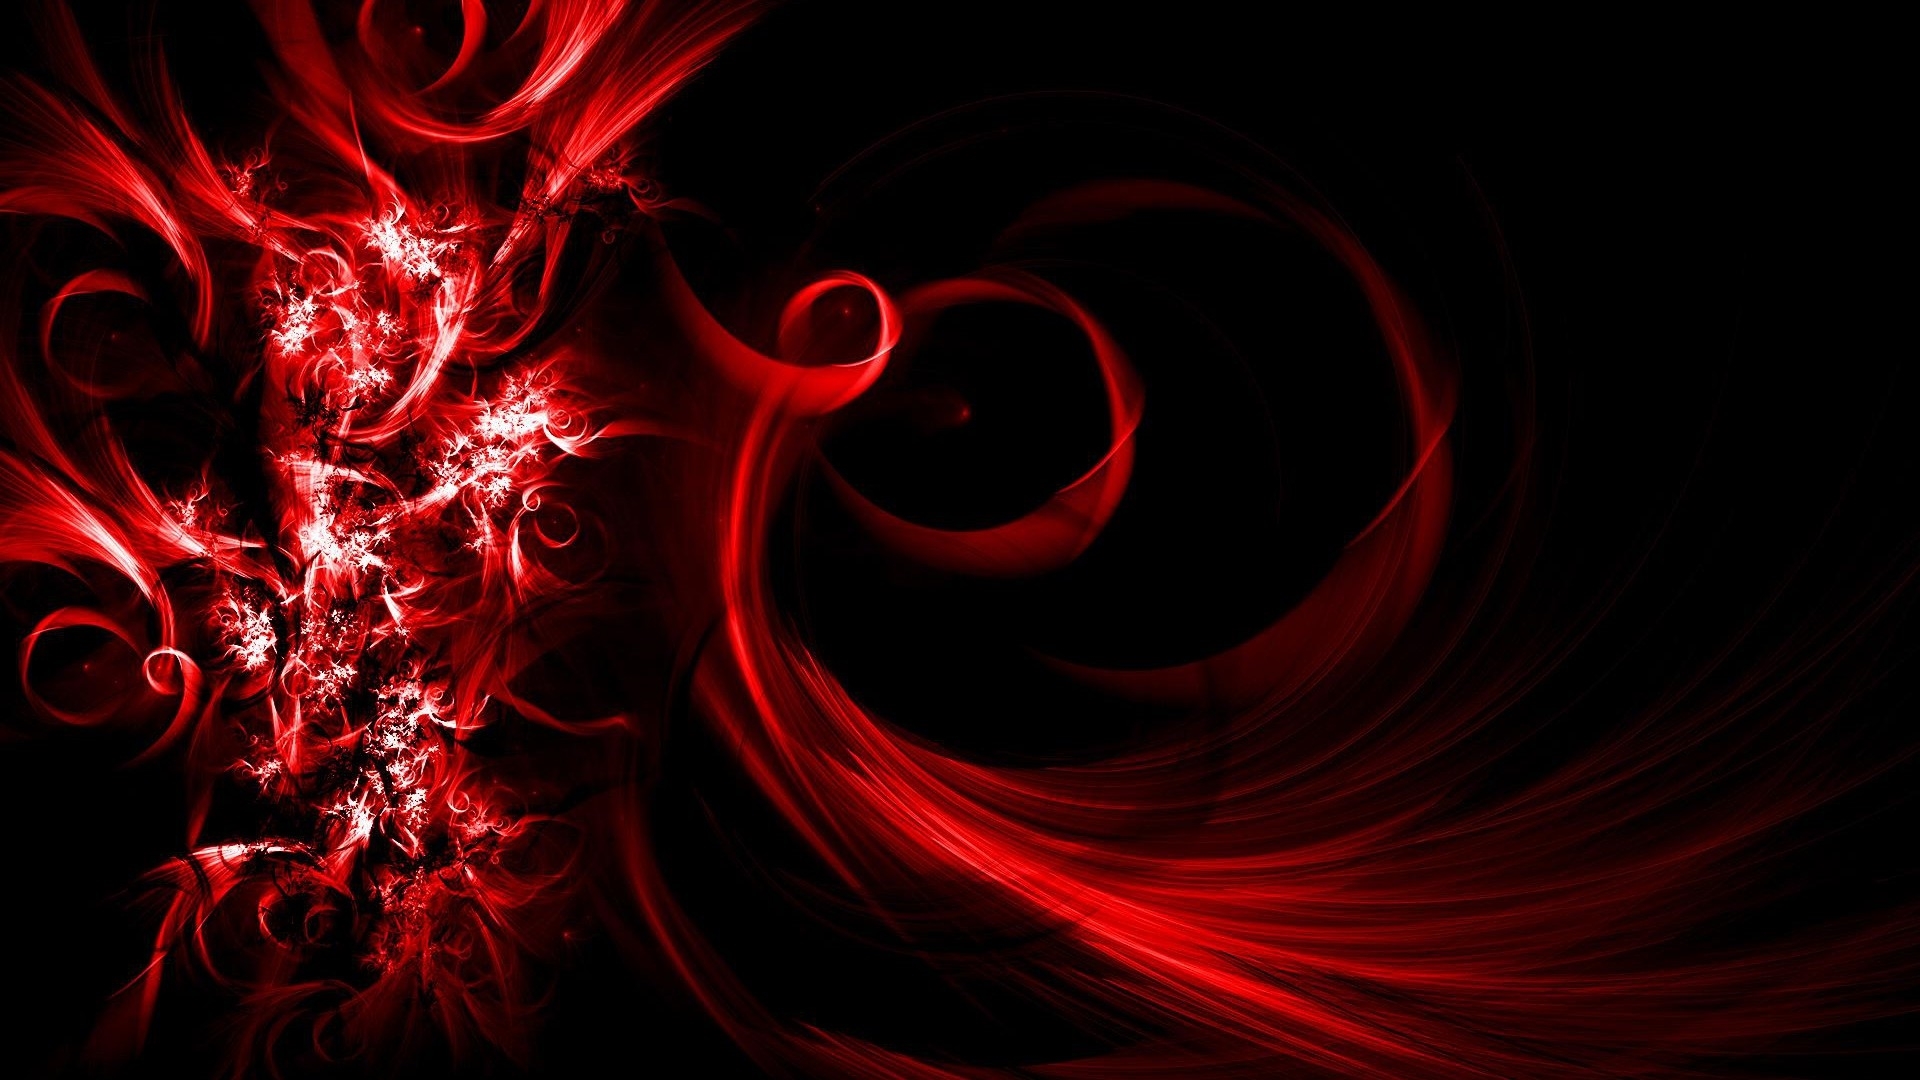 3d And Abstract Wallpapers - HD Desktop Backgrounds - Page 22